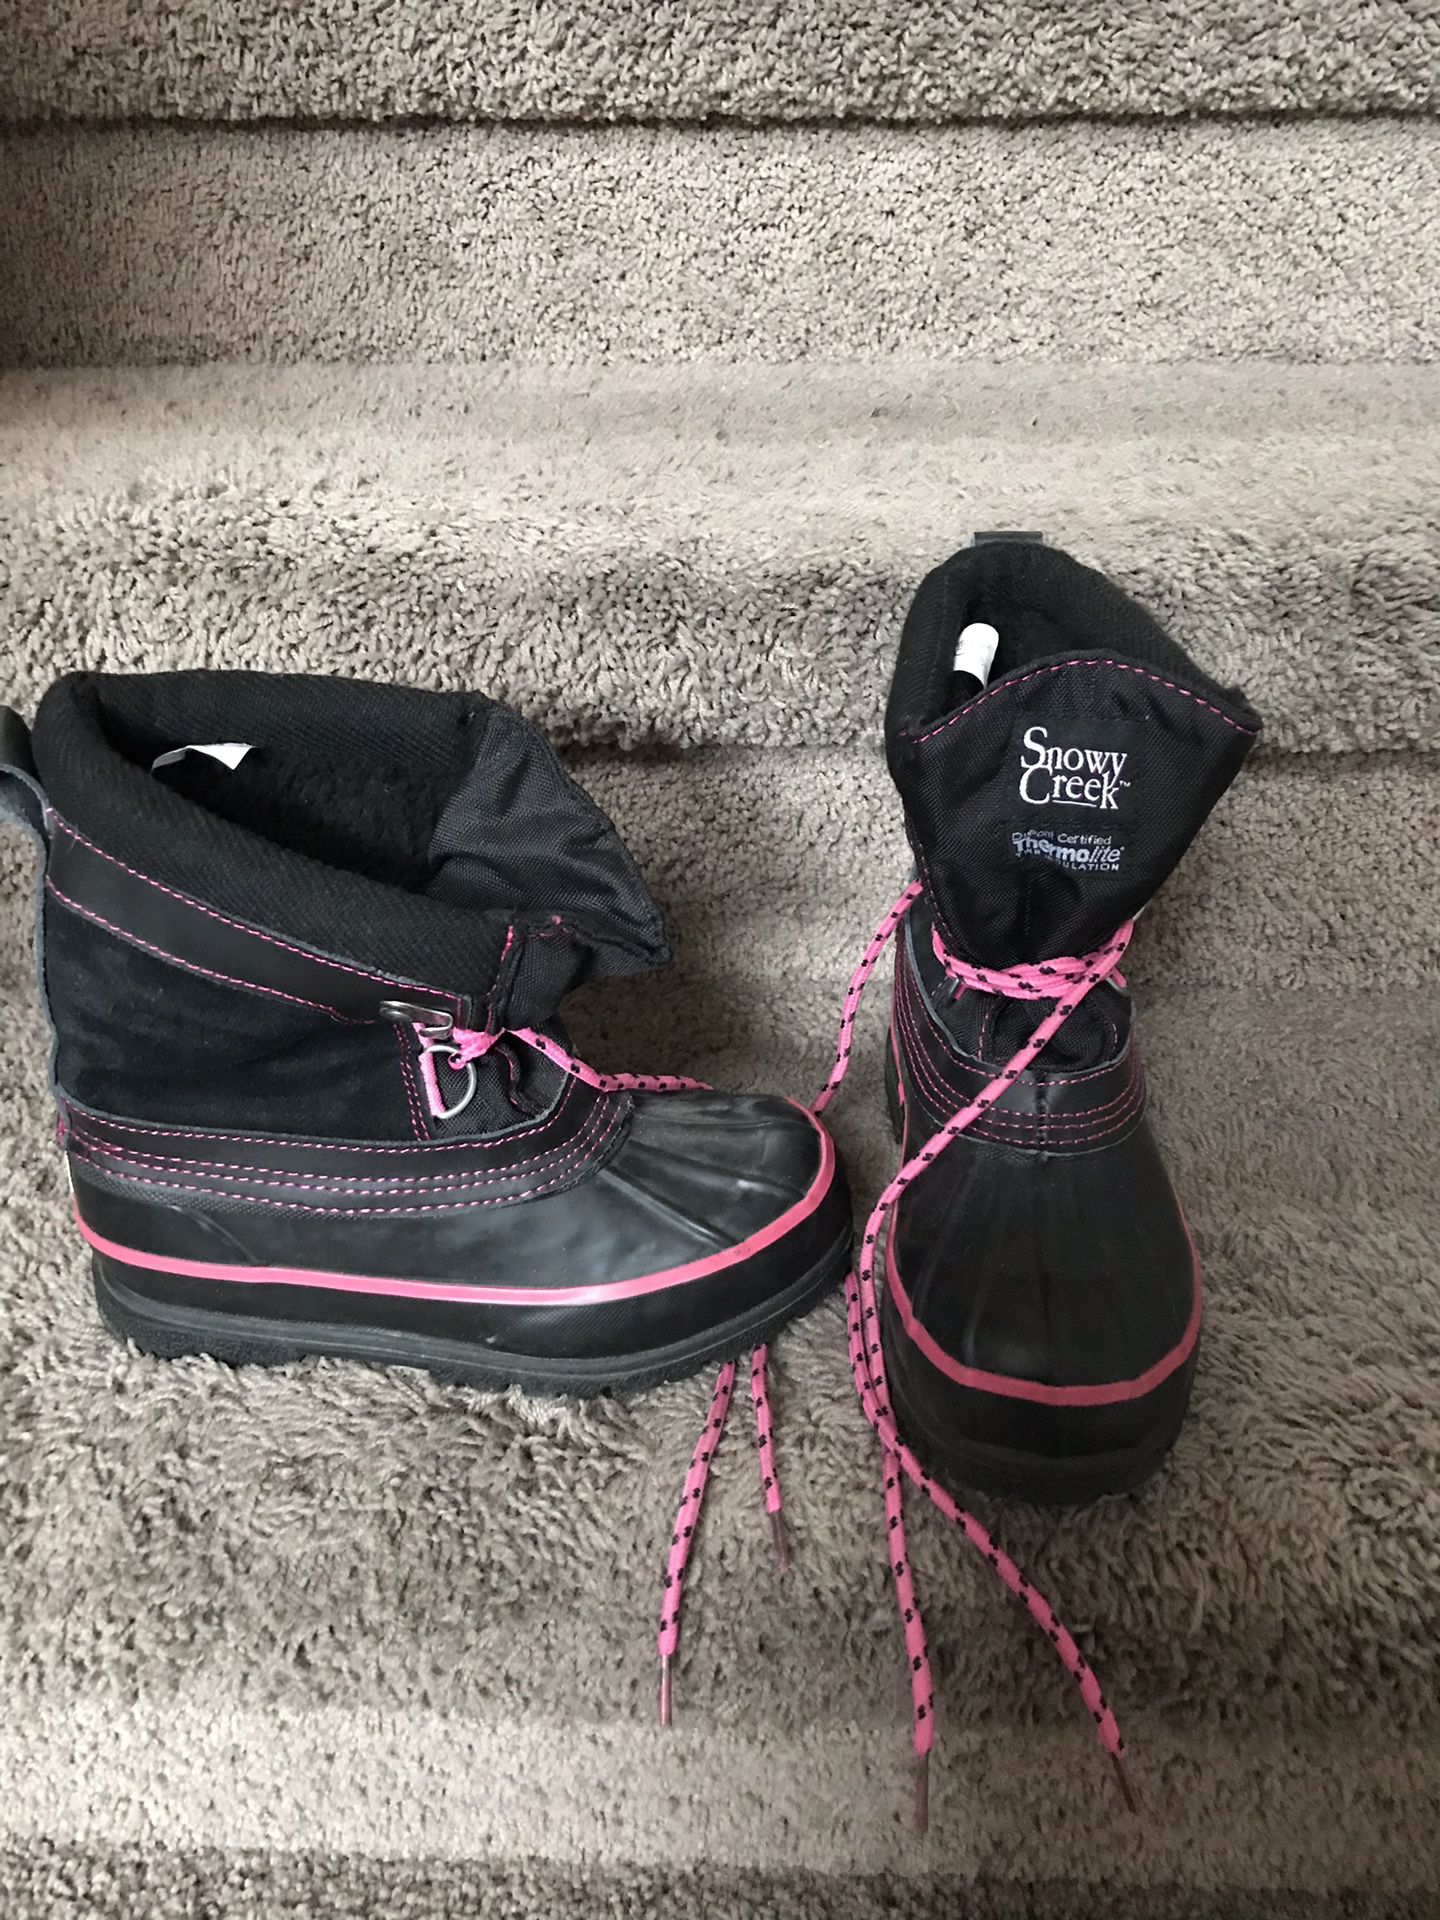 Girls winter boots -Size 1